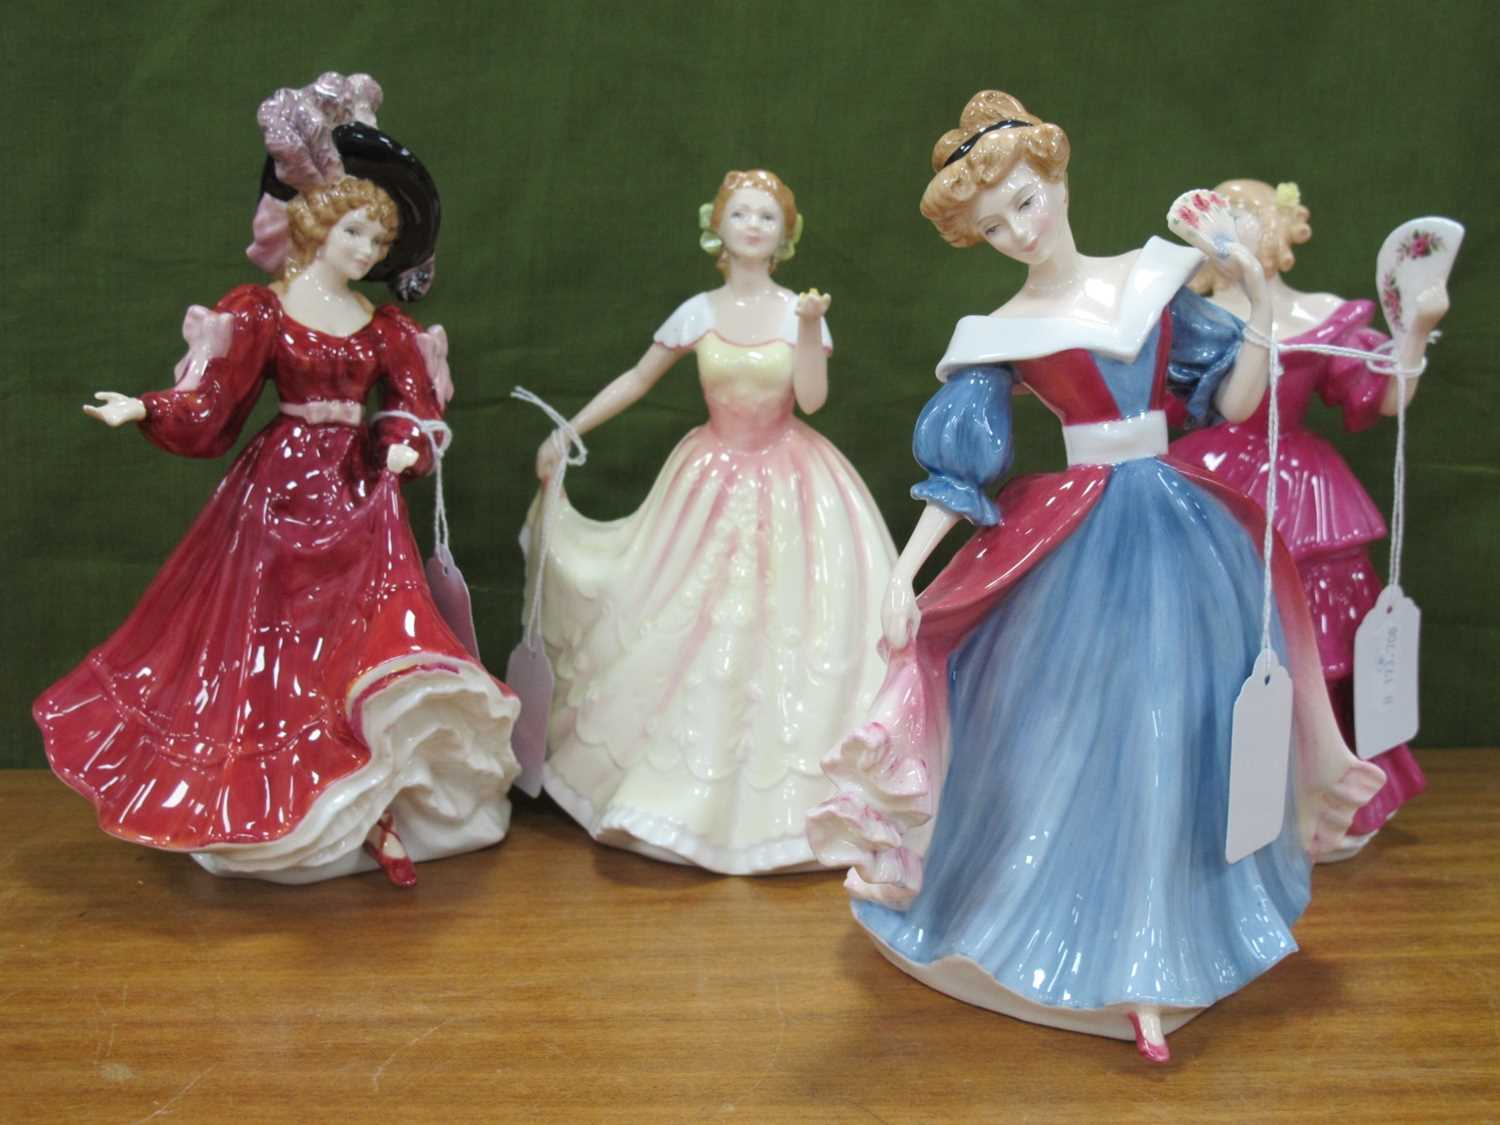 Royal Doulton Figure of the Year 'Deborah', 18.5cm high, 'Patricia, 'Jennifer' and 'Amy', each - Image 2 of 2